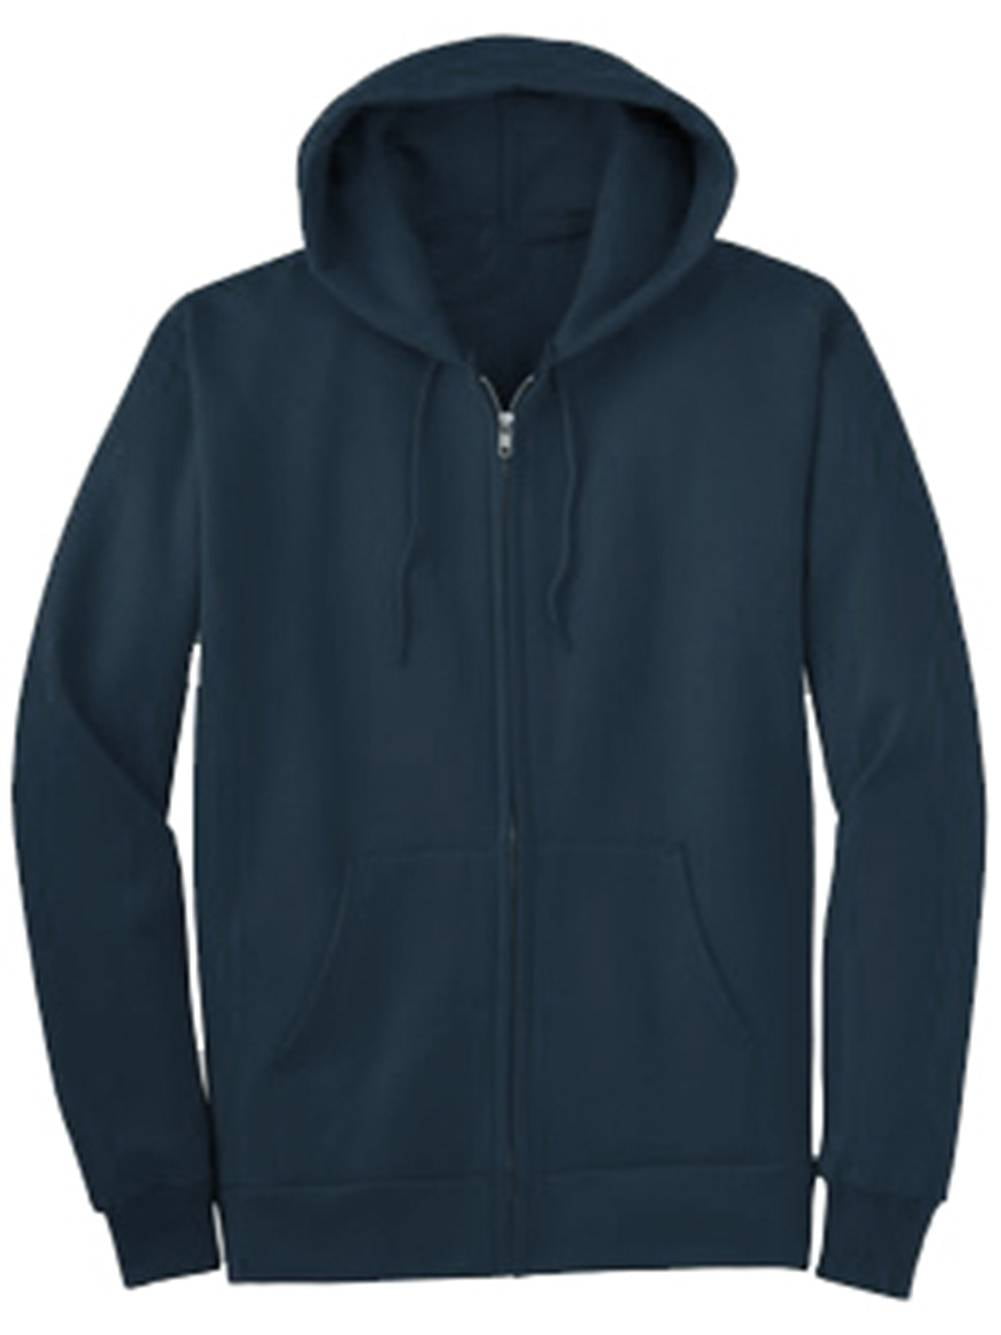 Classic Fitted Basic Zip Up Hoodied Sweater (XL, Navy) | Walmart Canada